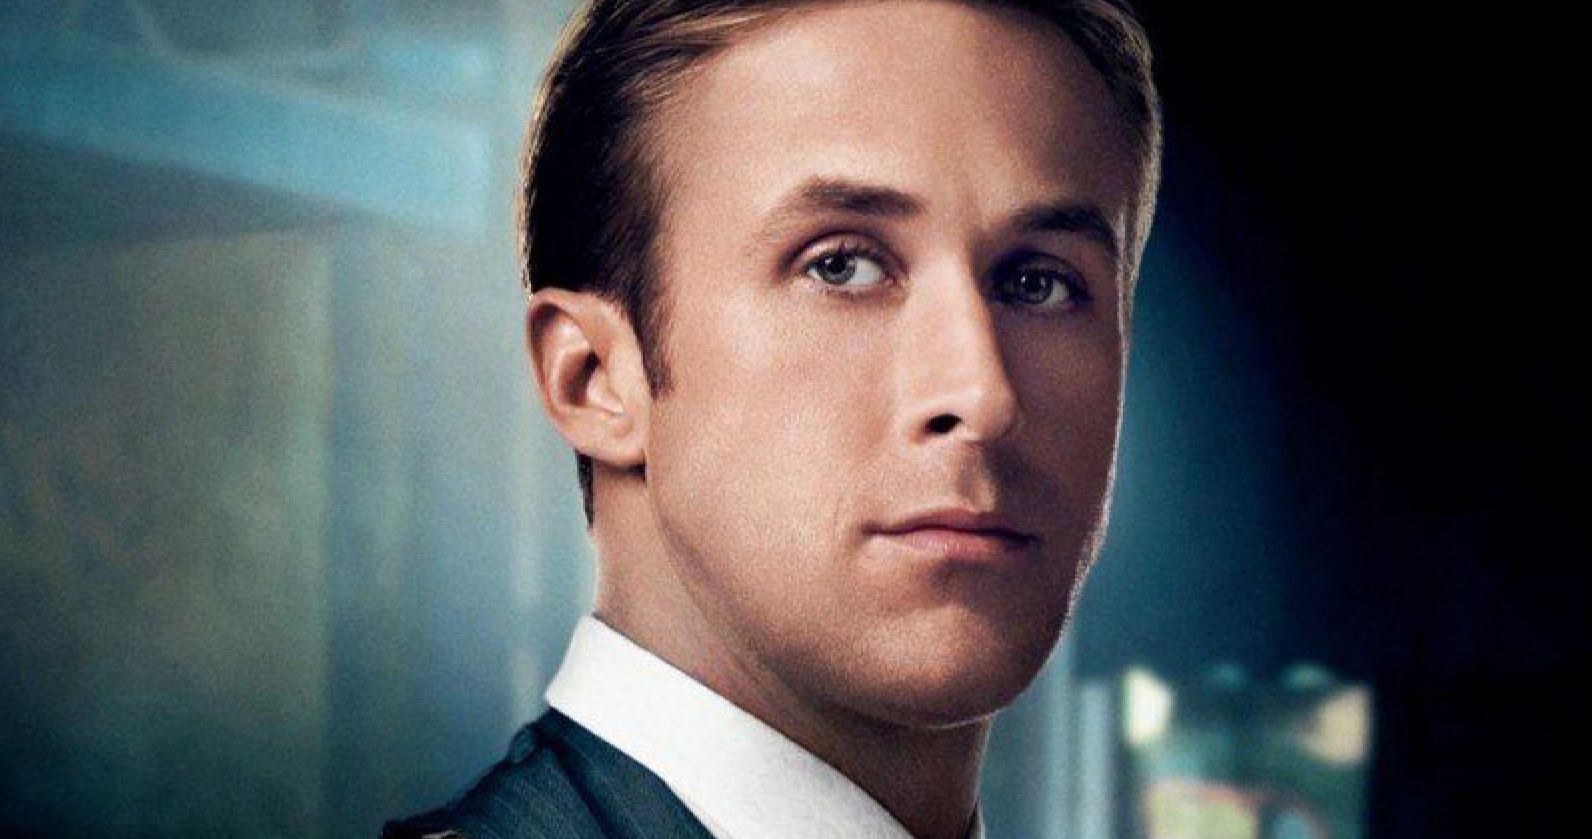 Ryan Gosling Is a 1950s Hollywood Star Who Loses His Memory in The Actor